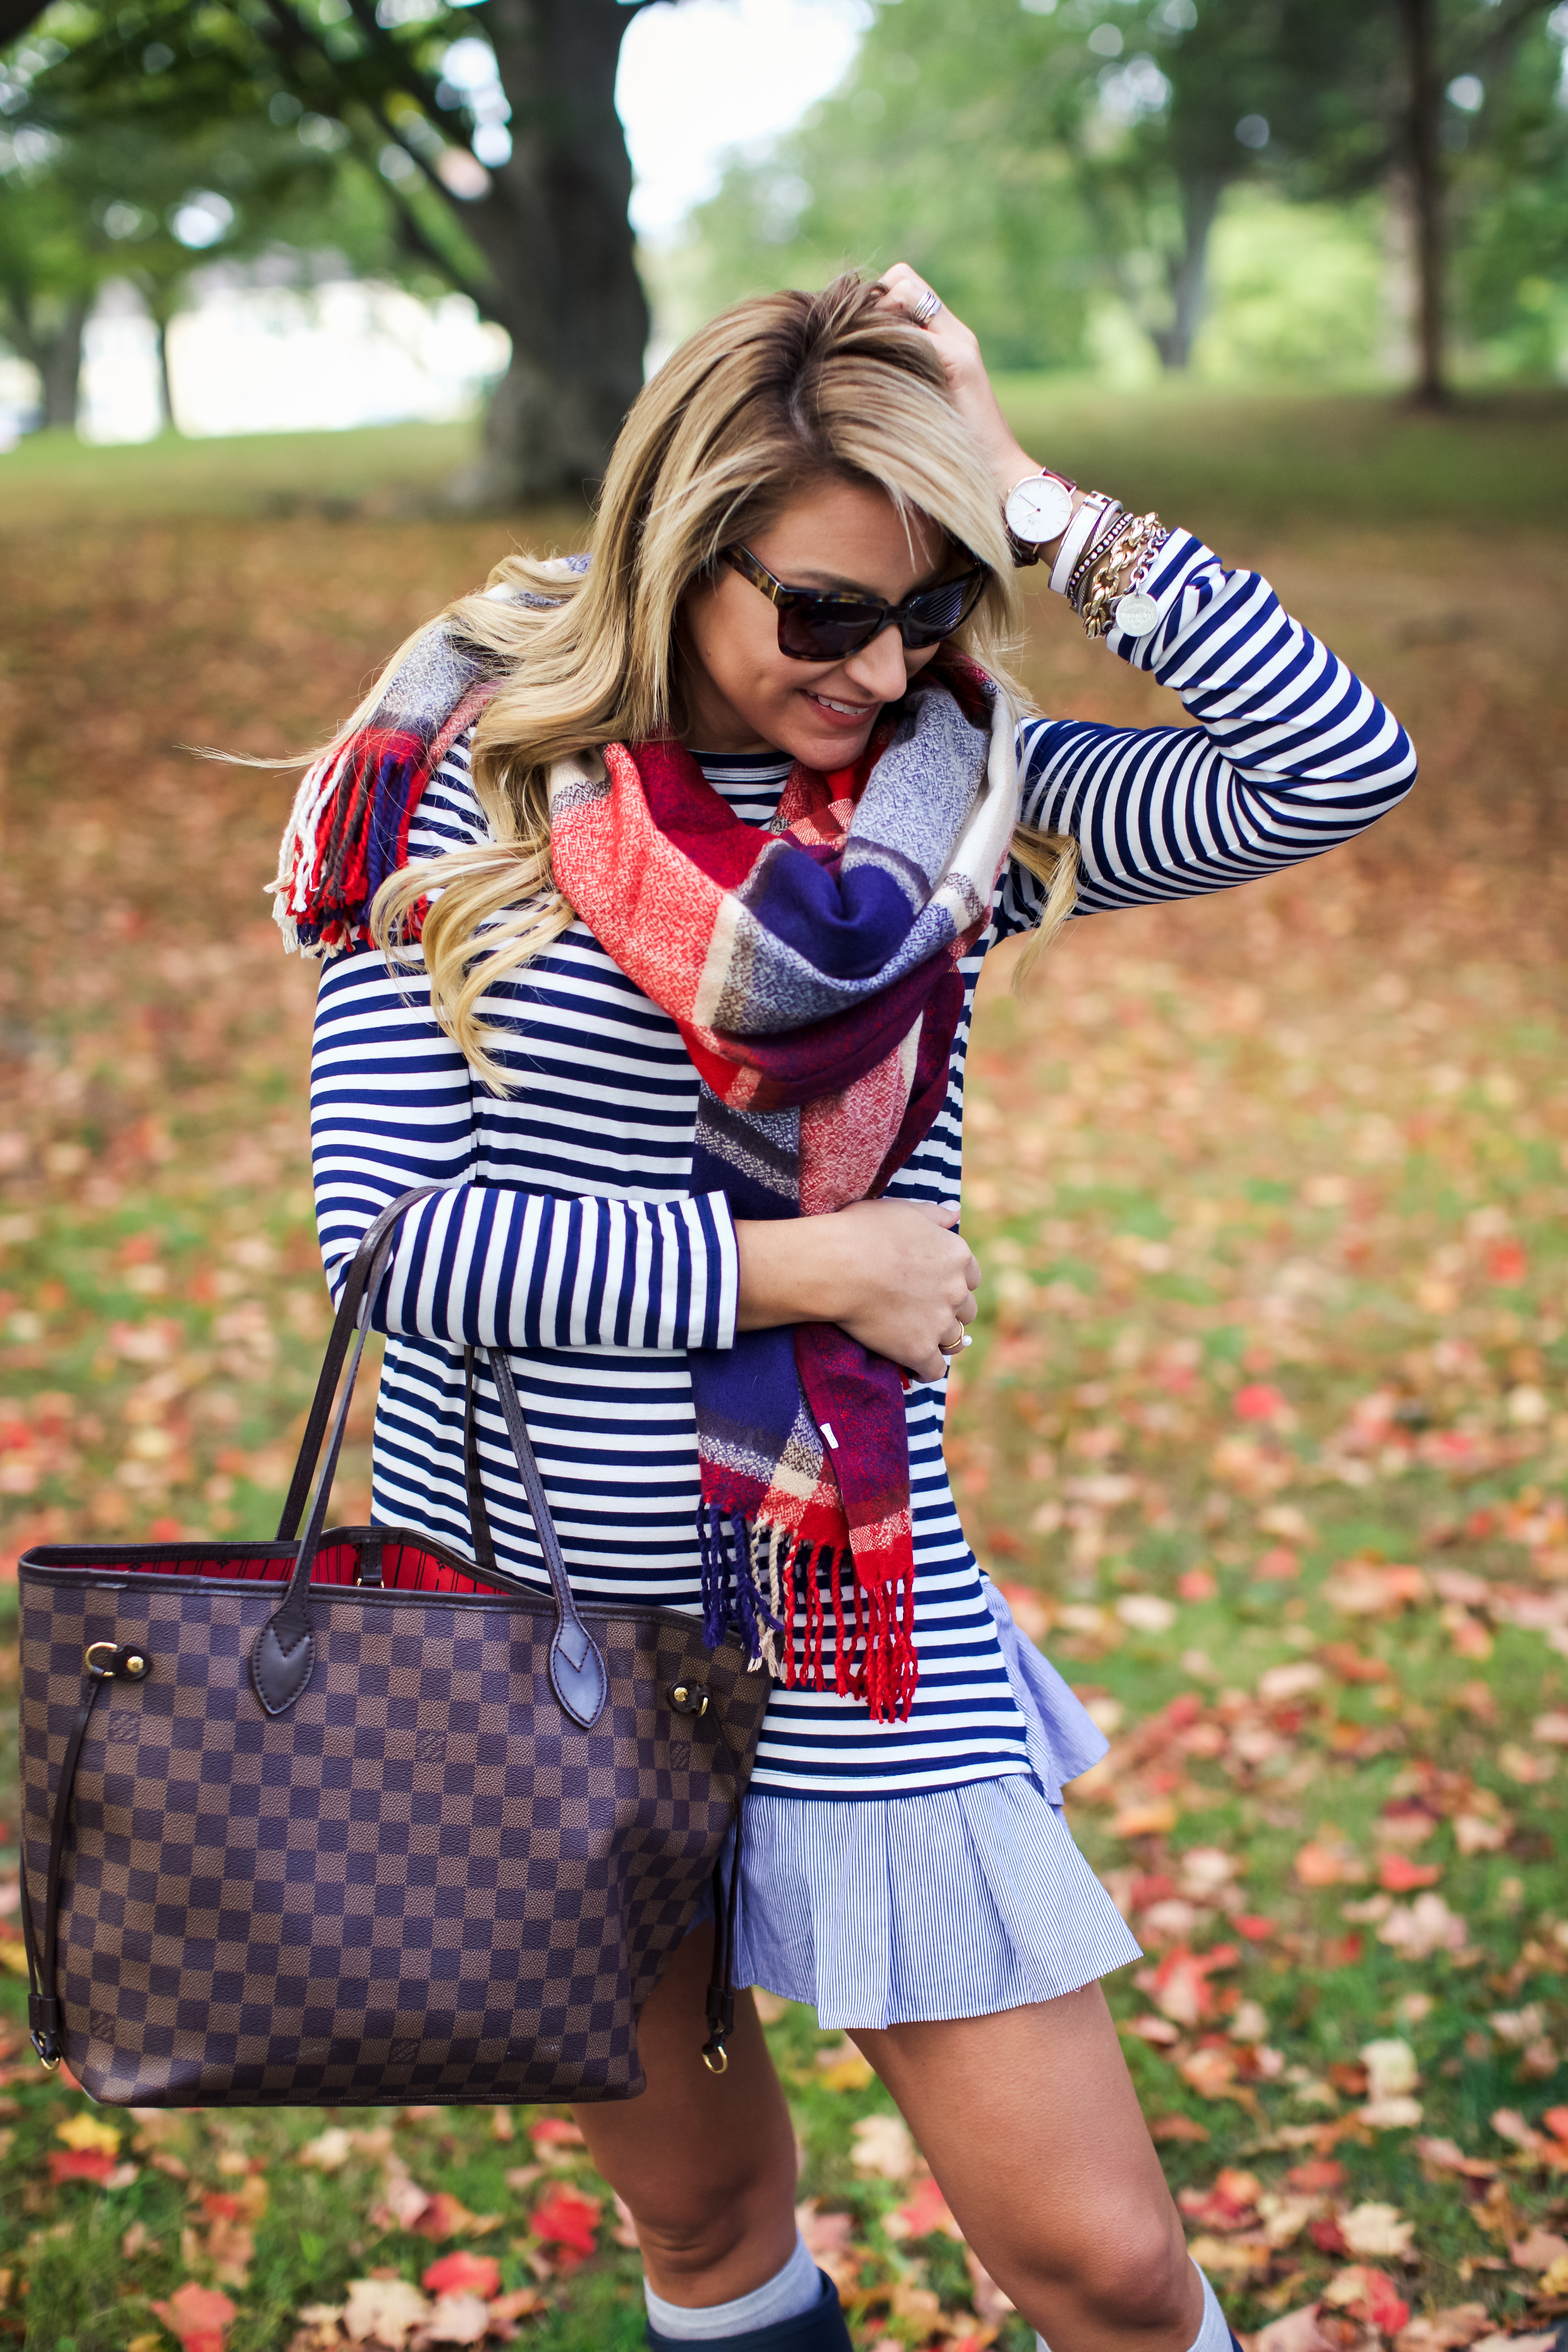 Louis Vuitton Scarf  Louis vuitton scarf, Ways to wear a scarf, Outfits